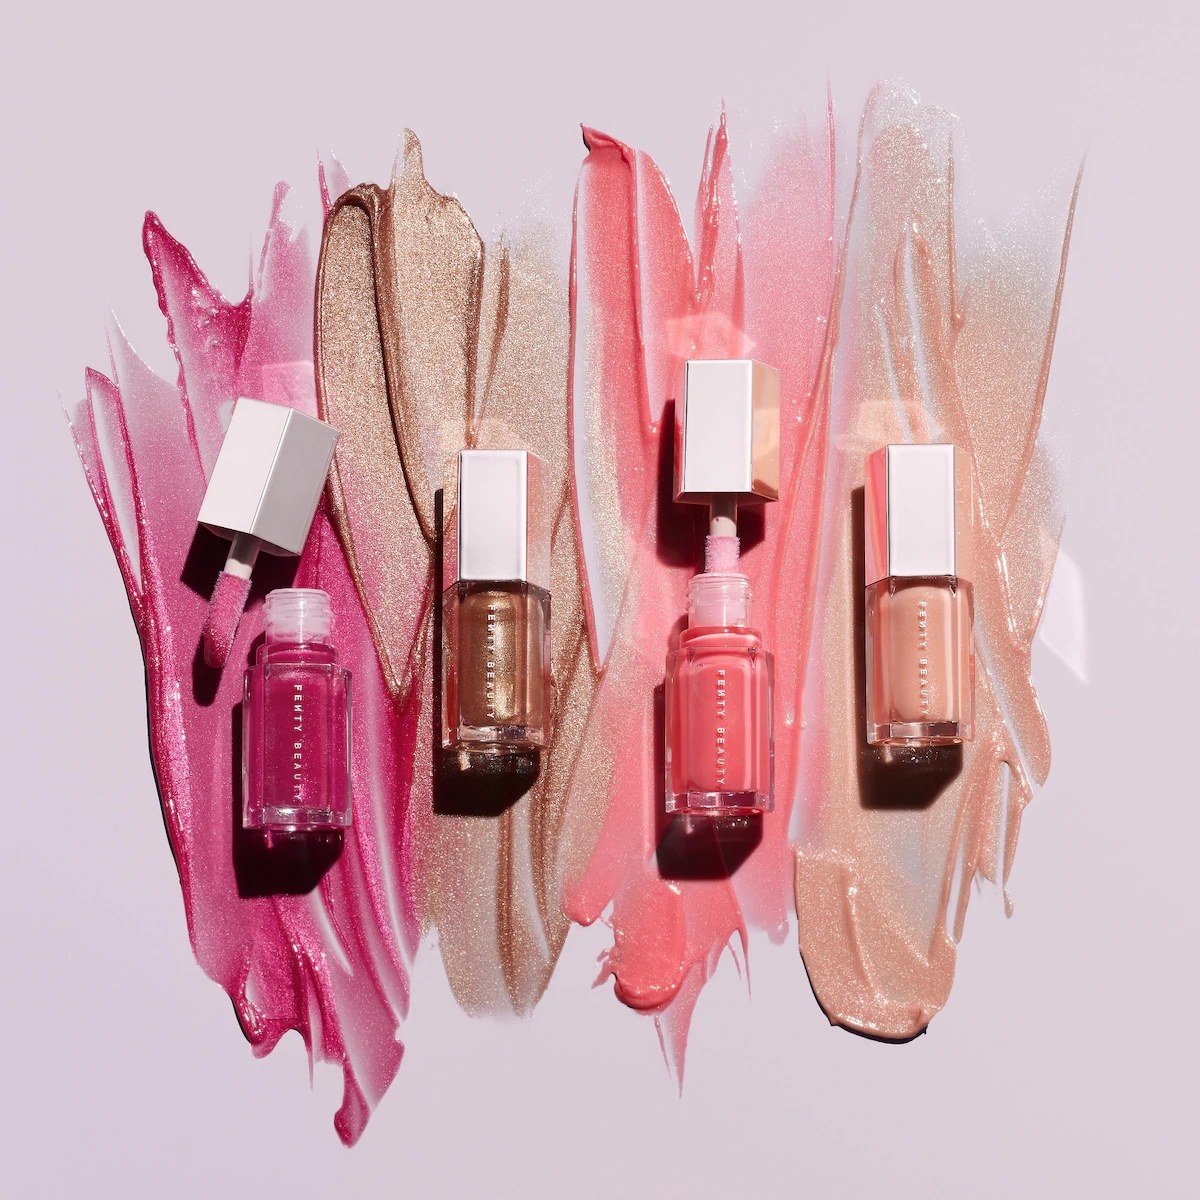 The mini glosses in various shades of pink, metallic and nude